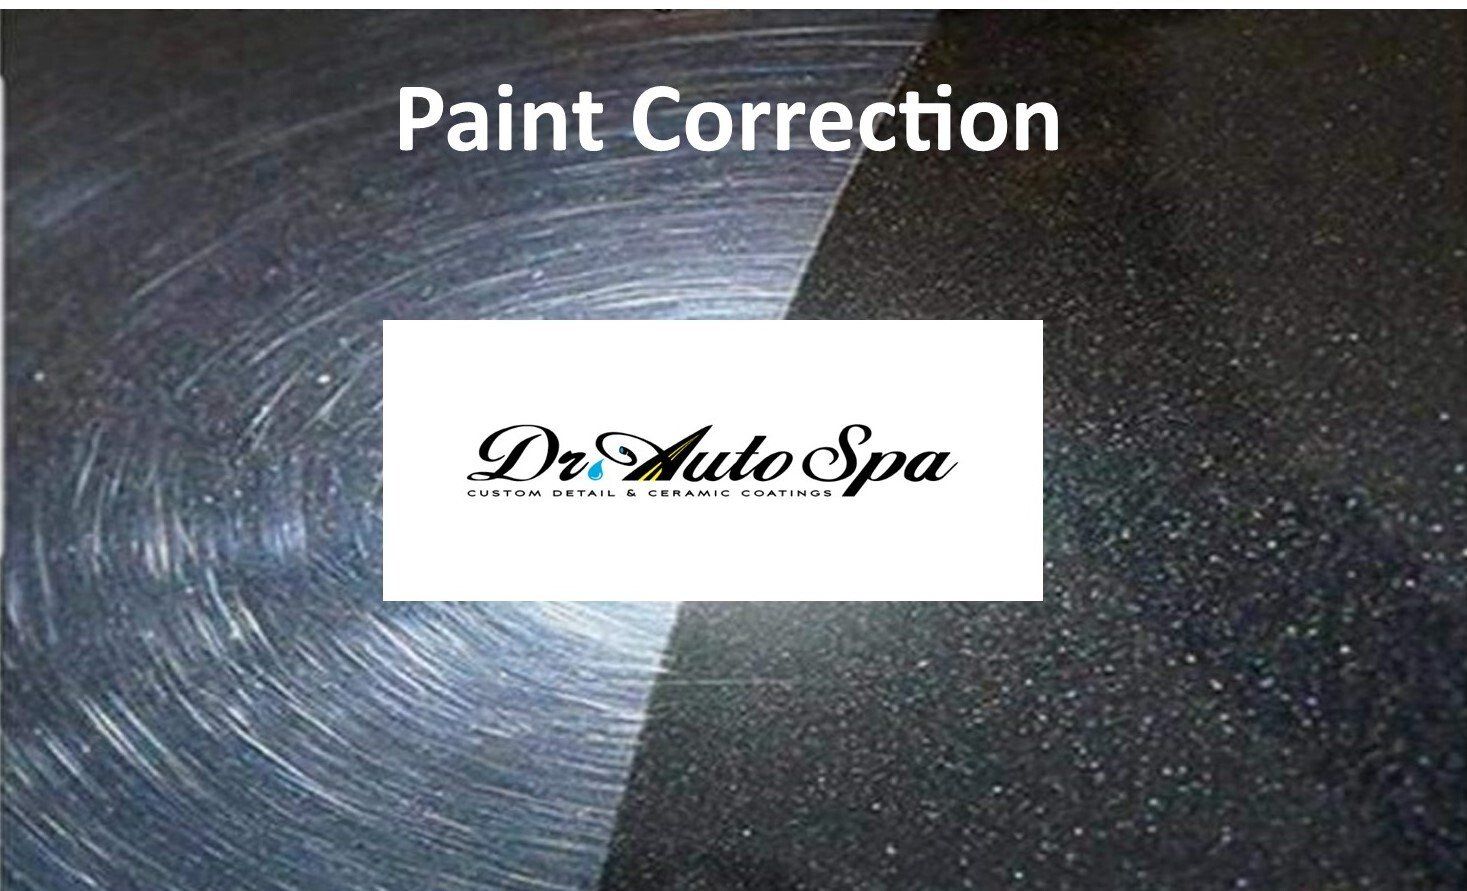 dr auto spa paint correction result side by side